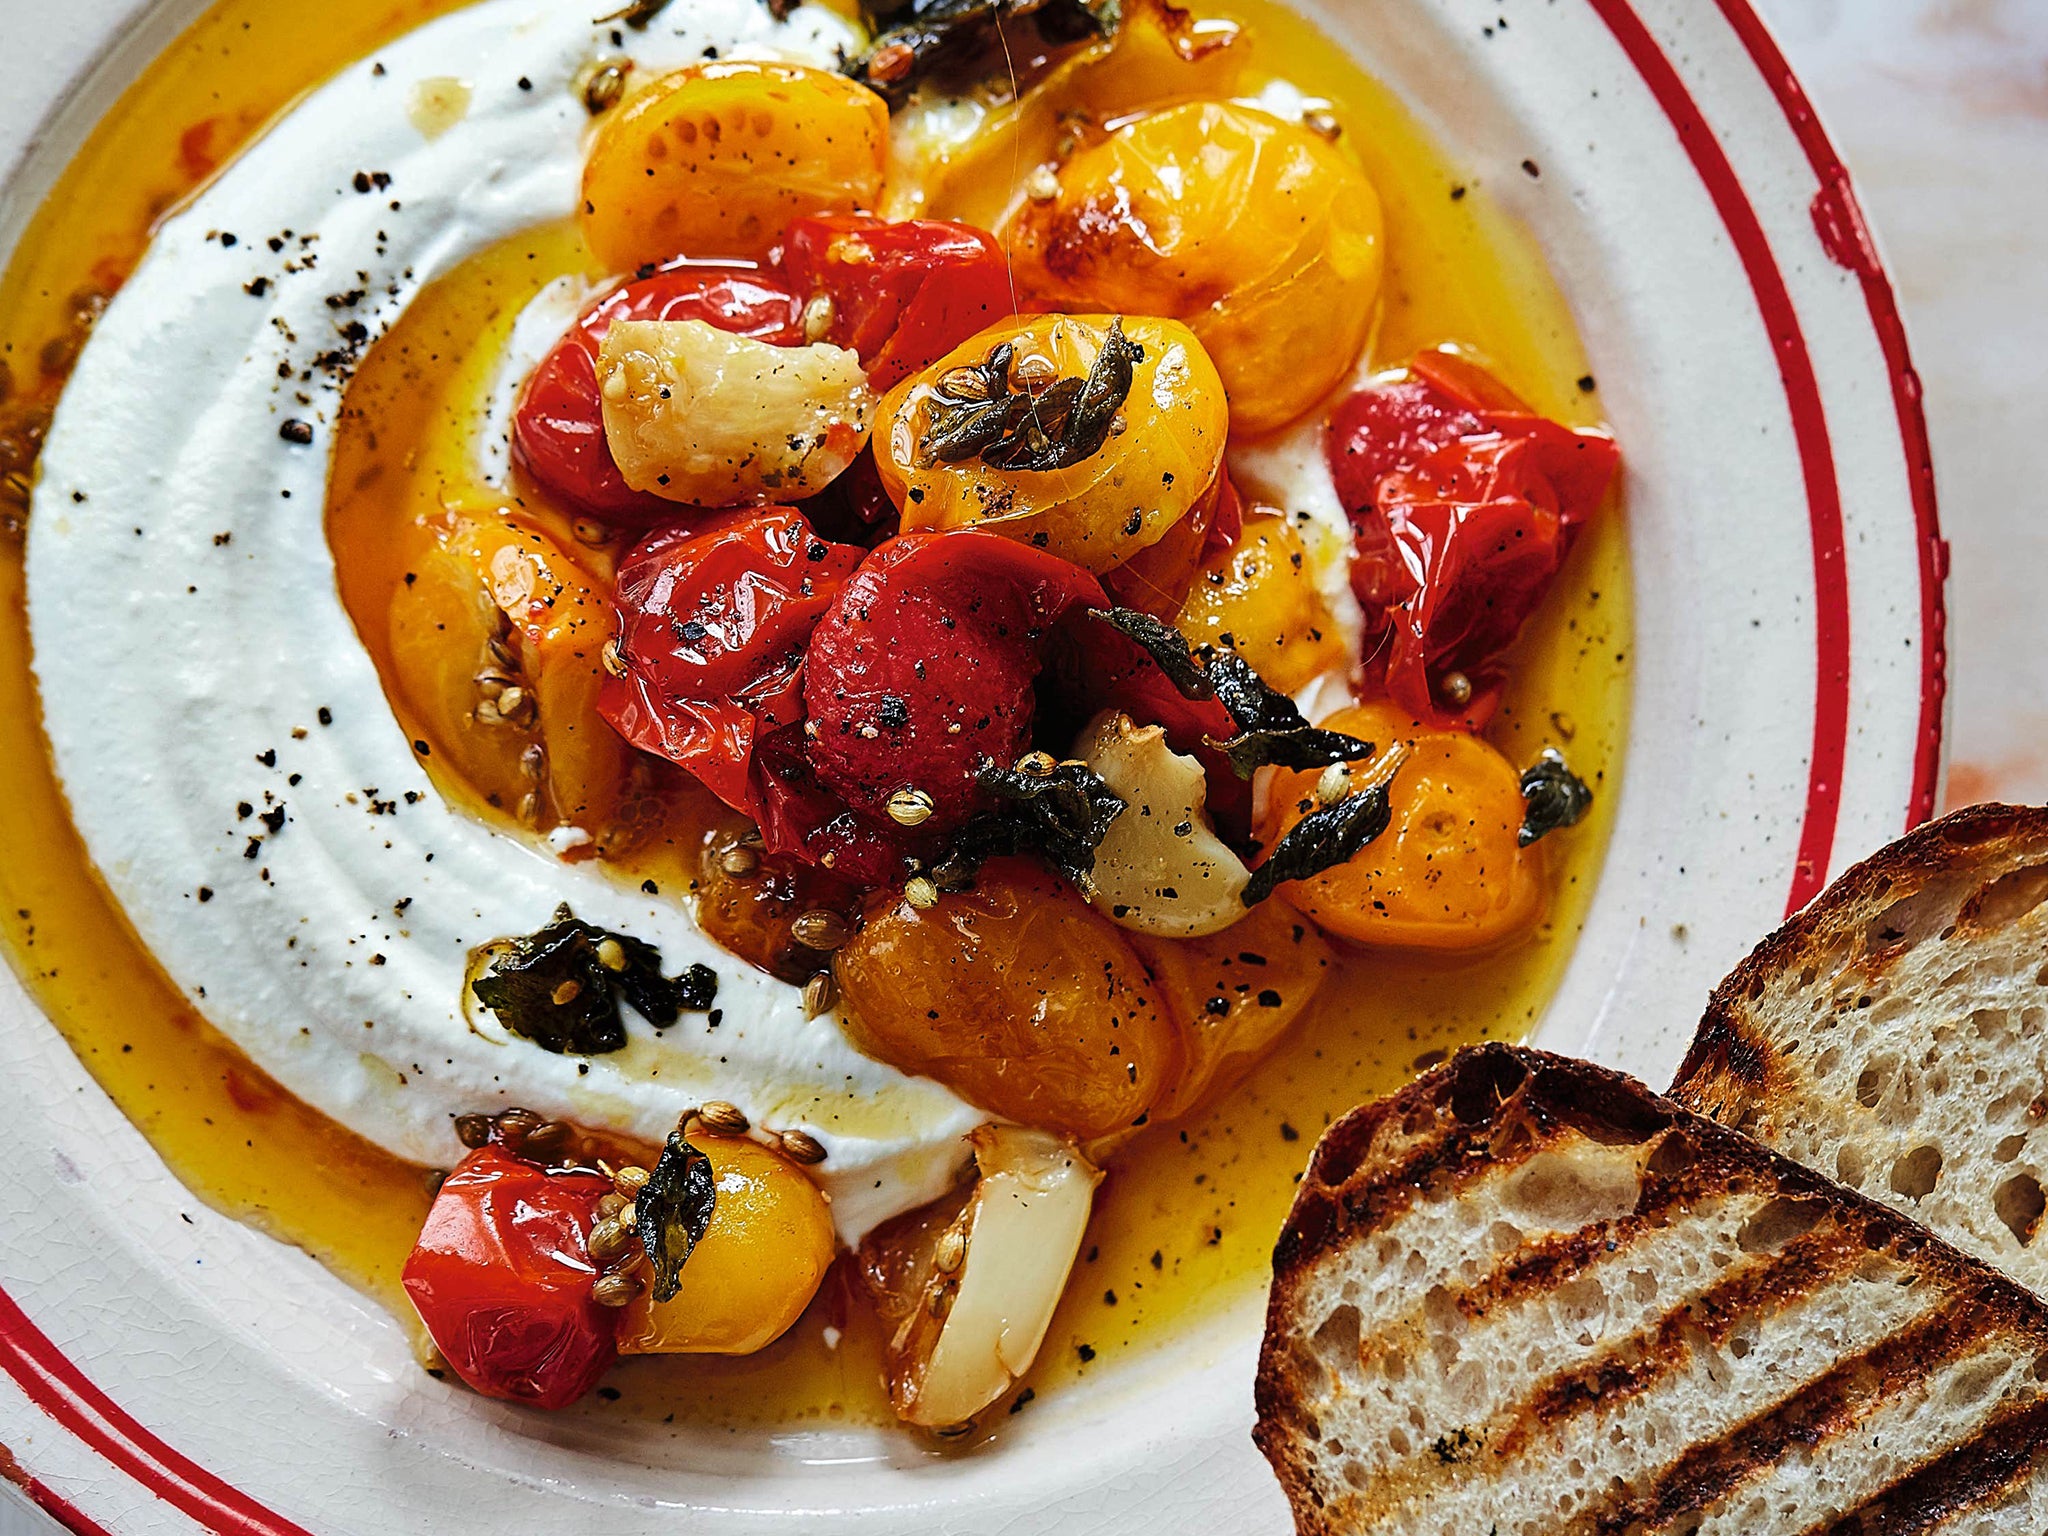 The perfect topping for hunks of grilled bread